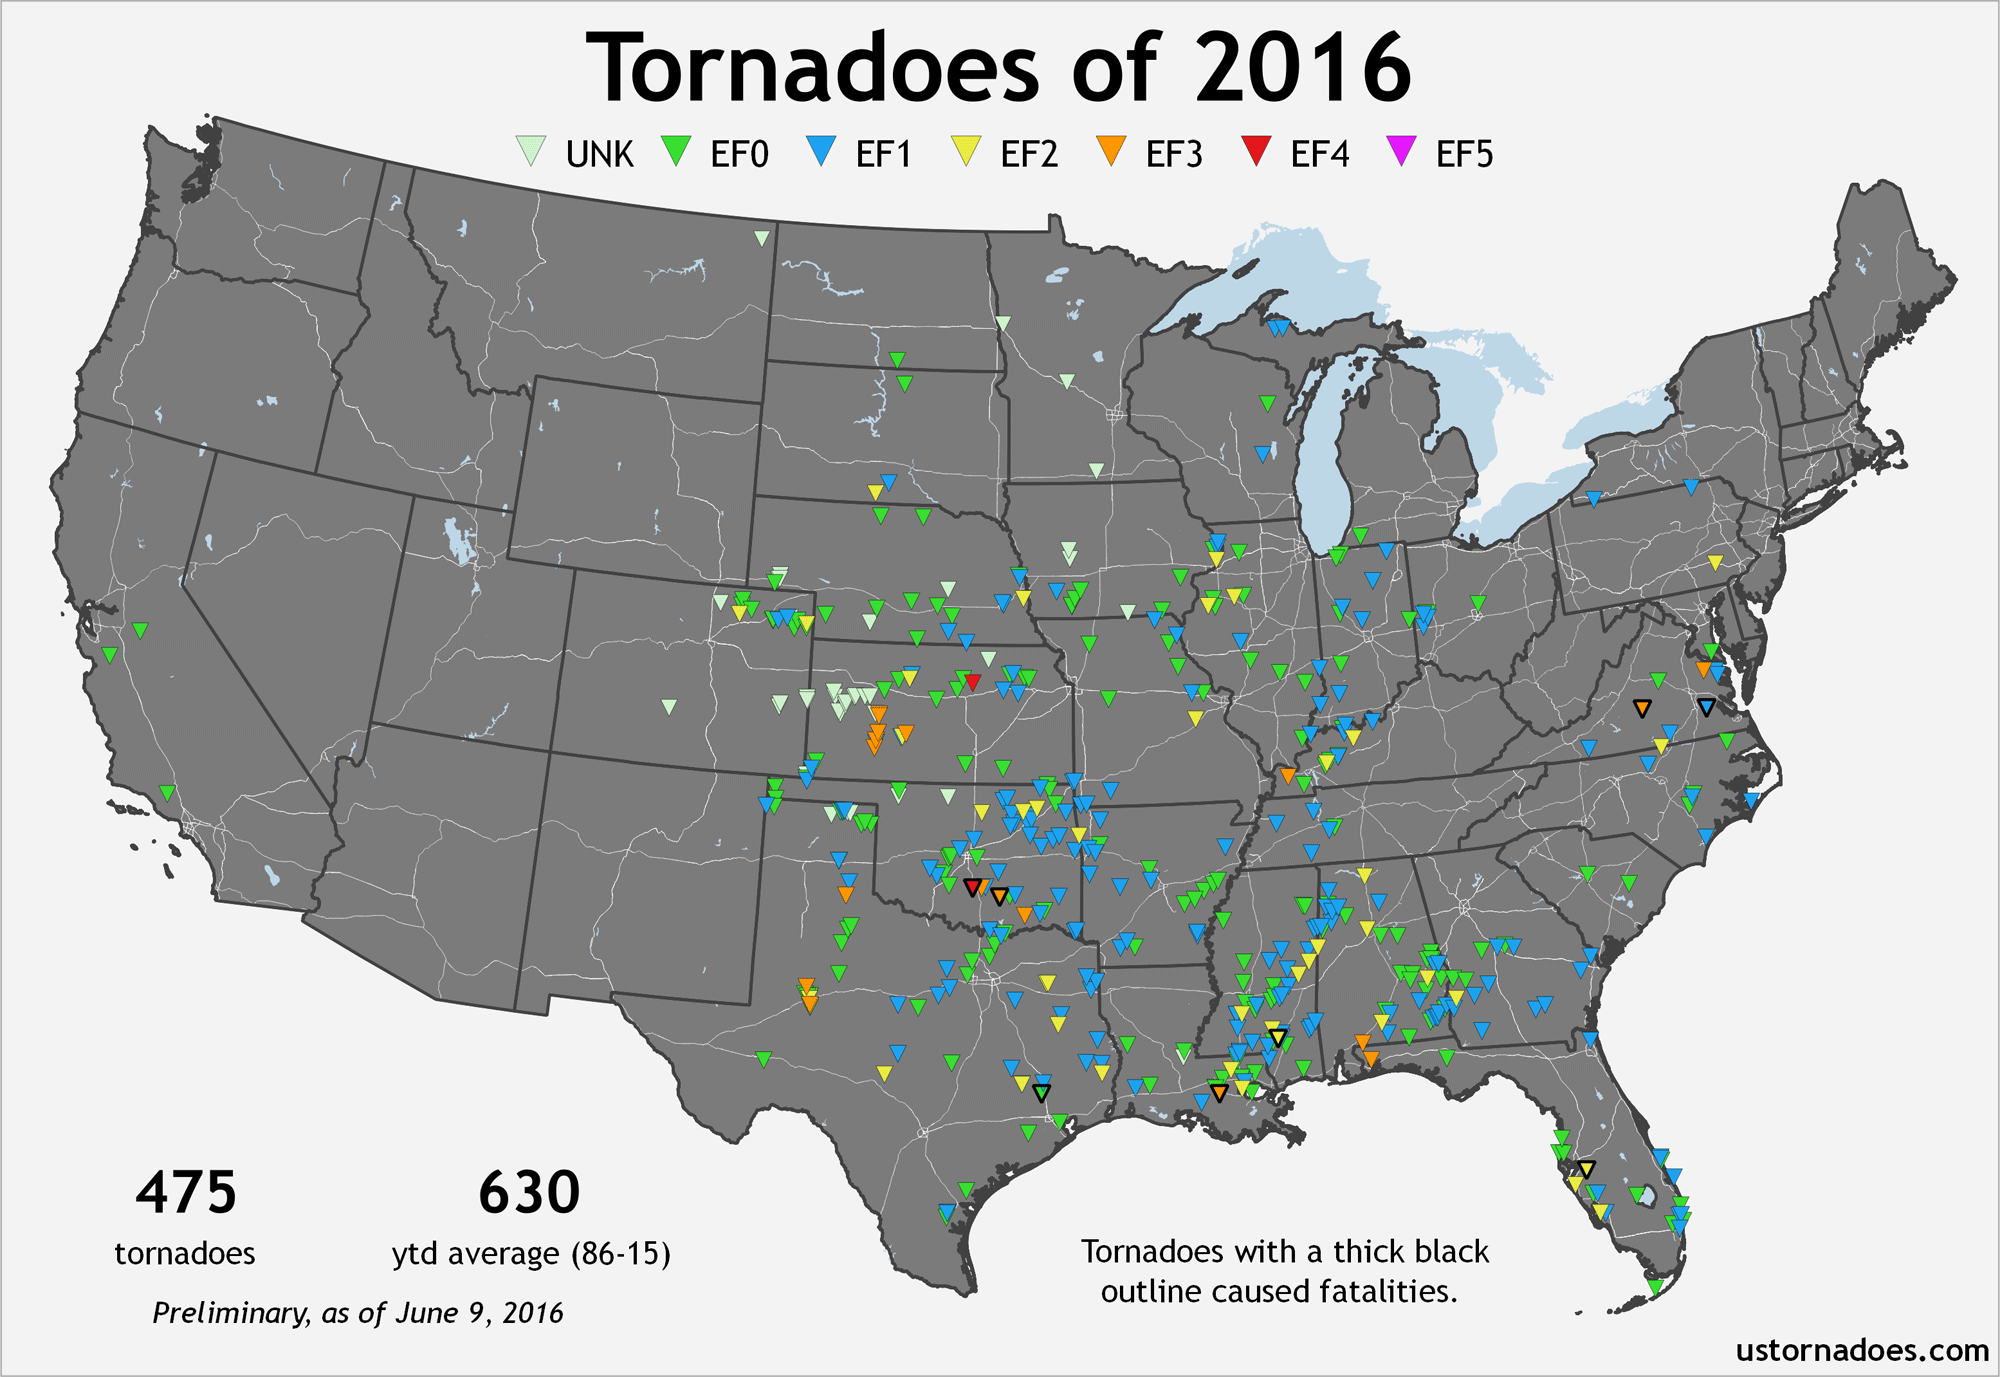 Tracking the tornadoes of 2016 (this project has been discontinued)